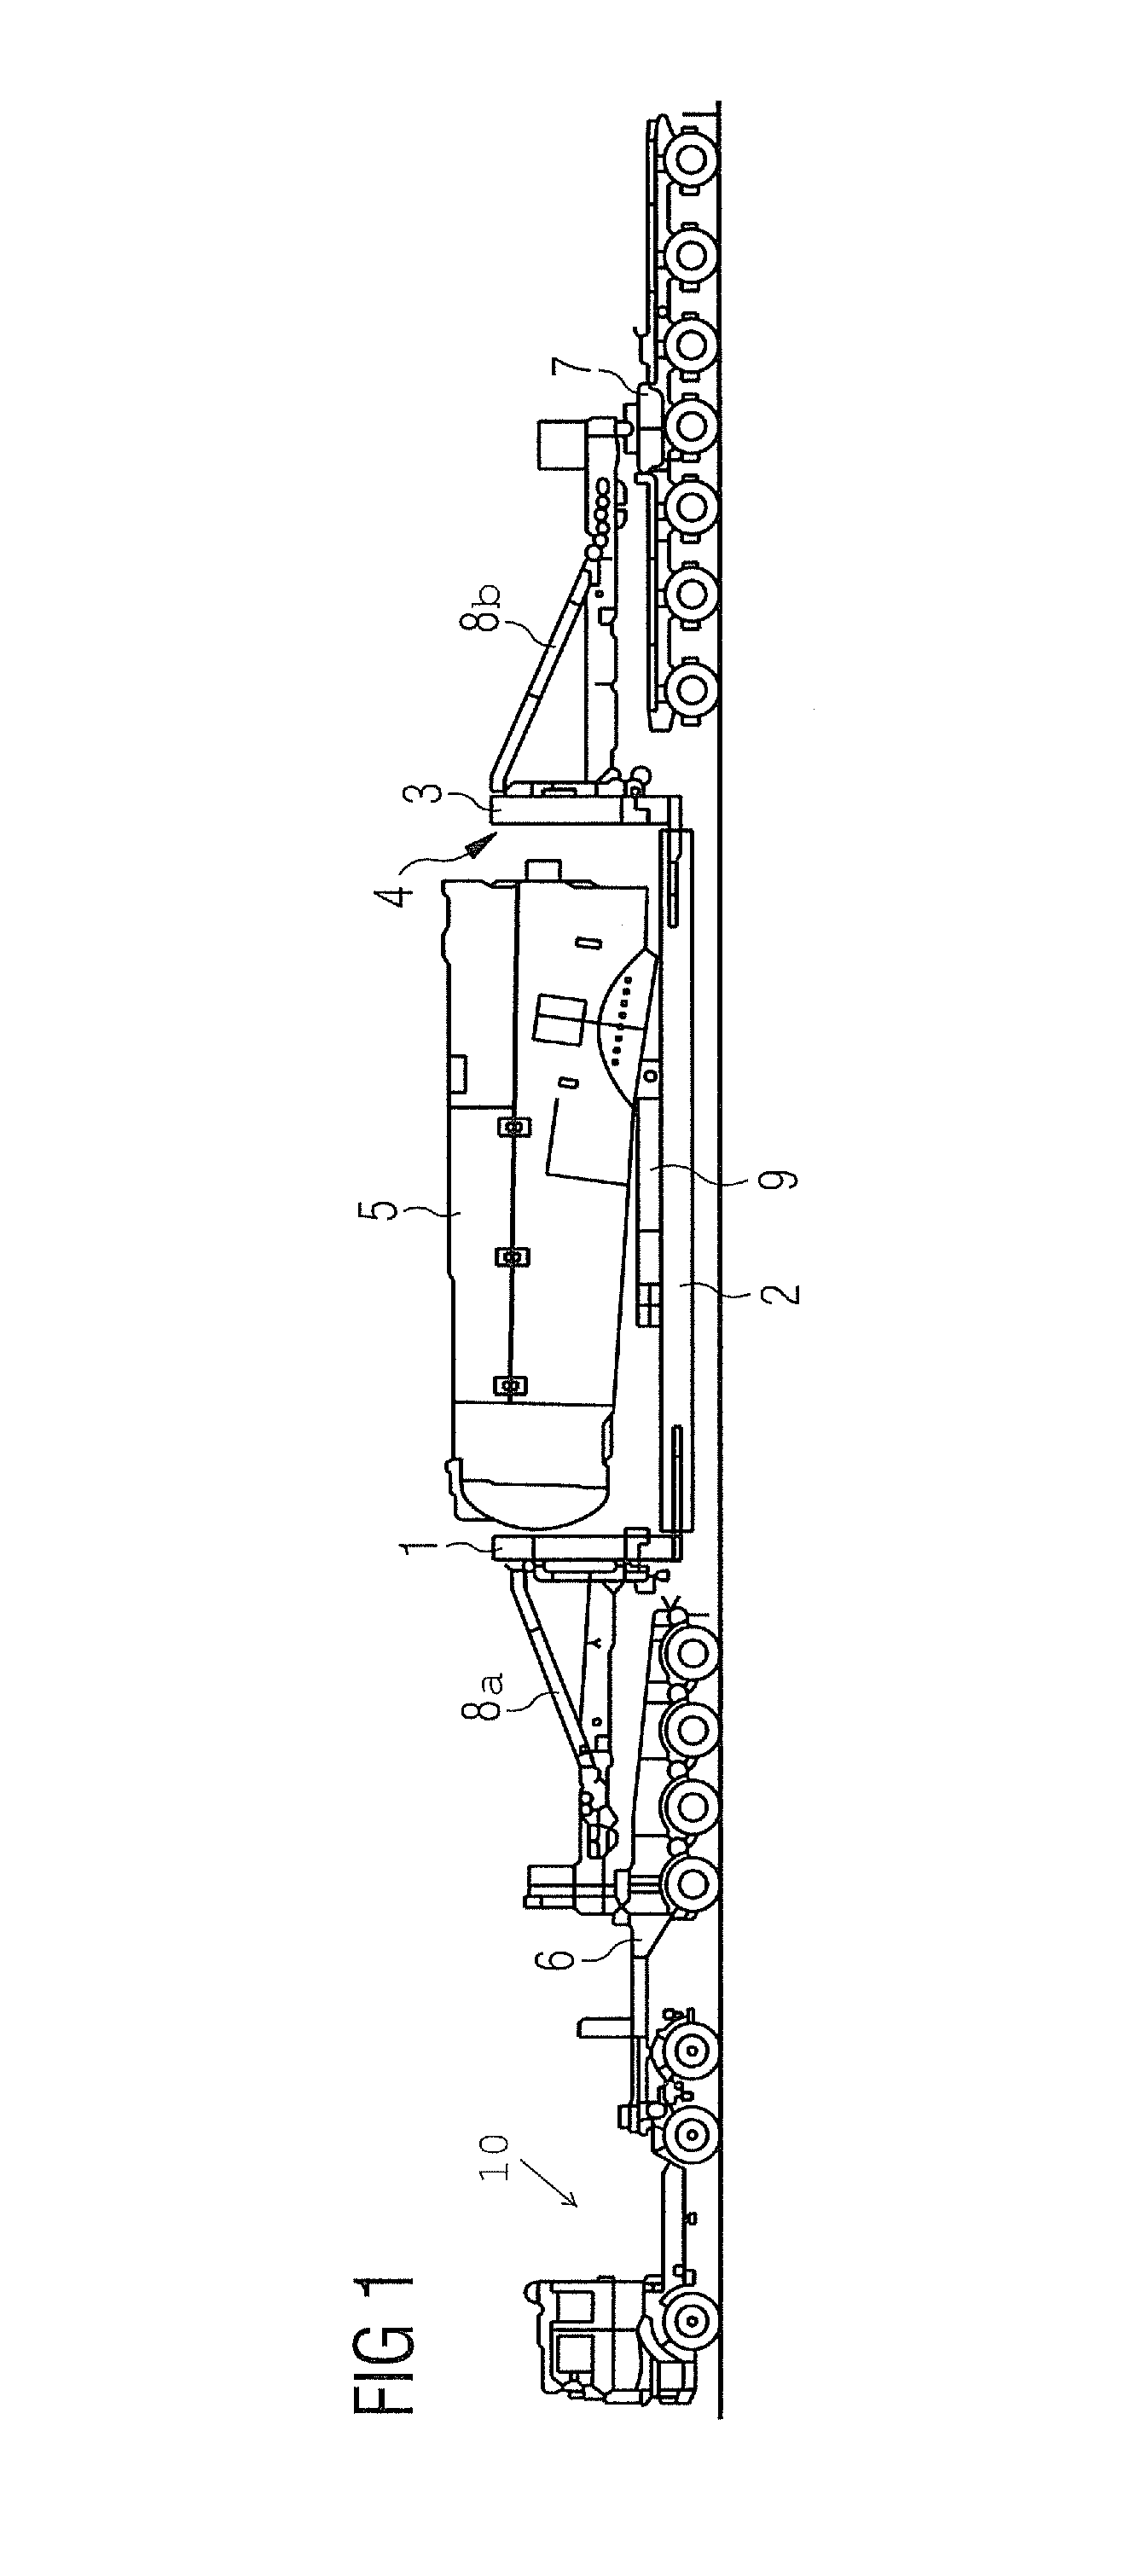 Arrangement for the transport of wind turbine components